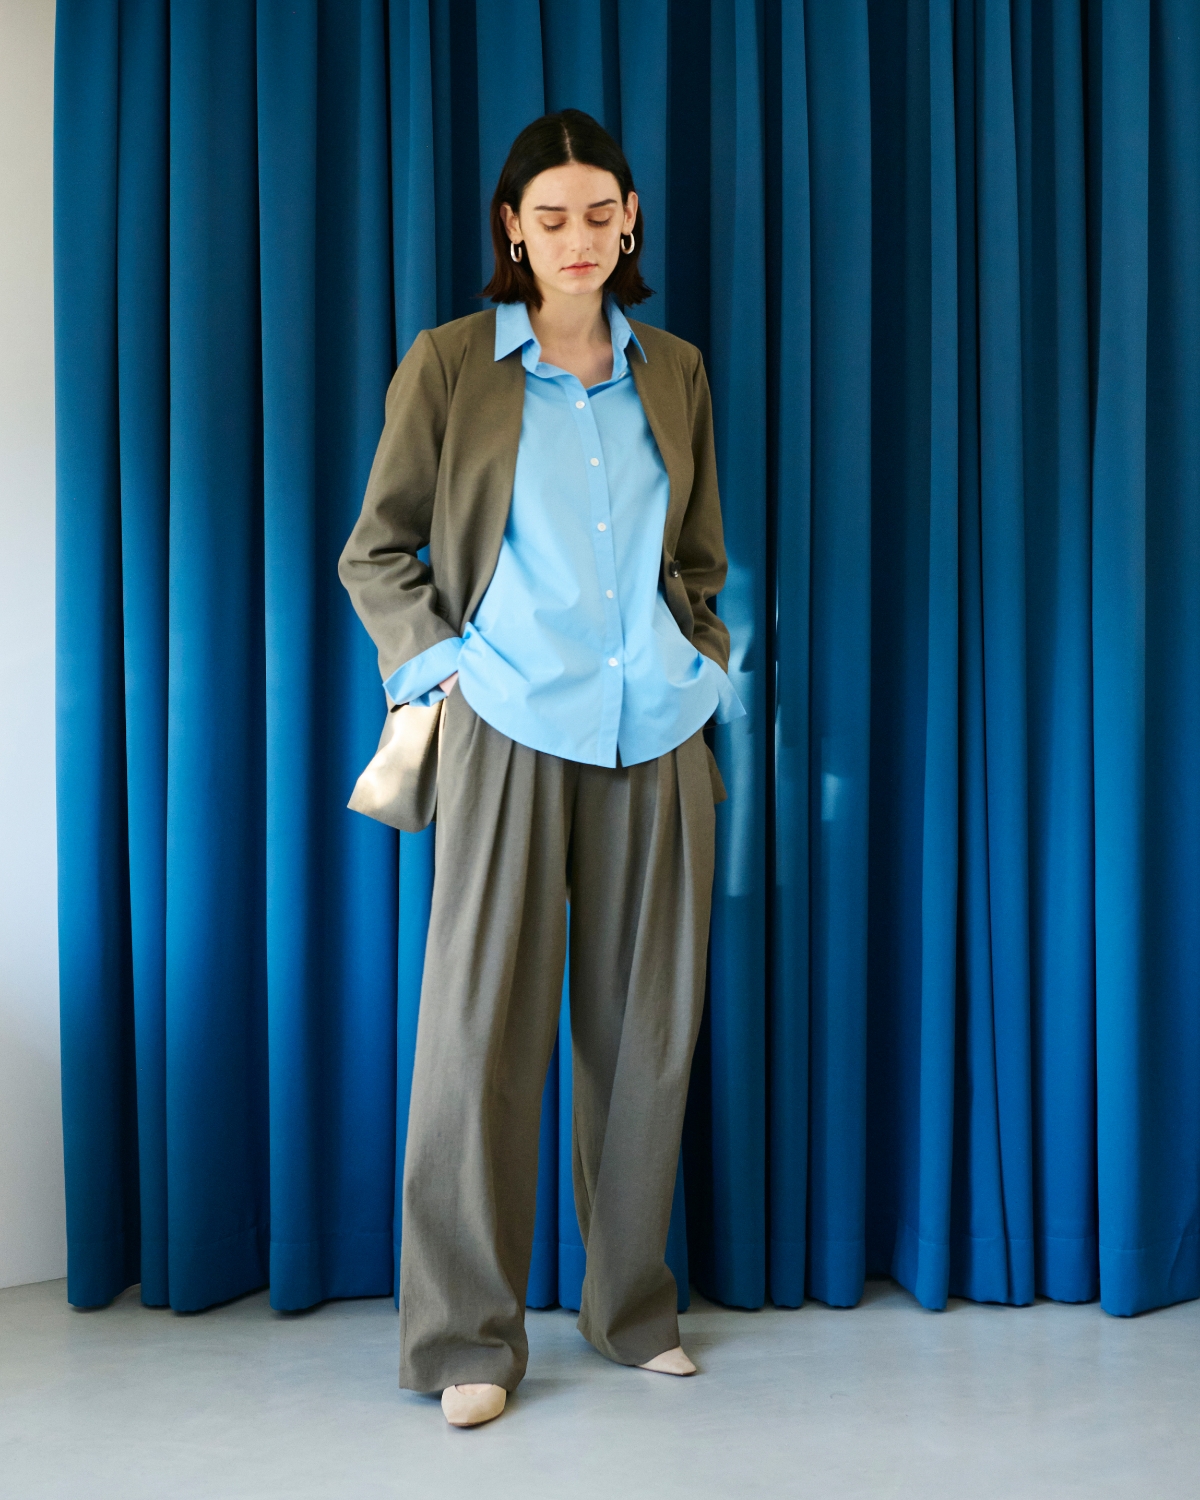 Not Just Comfort Linen for the City LINEN OX Collectionを着用している女性モデル05